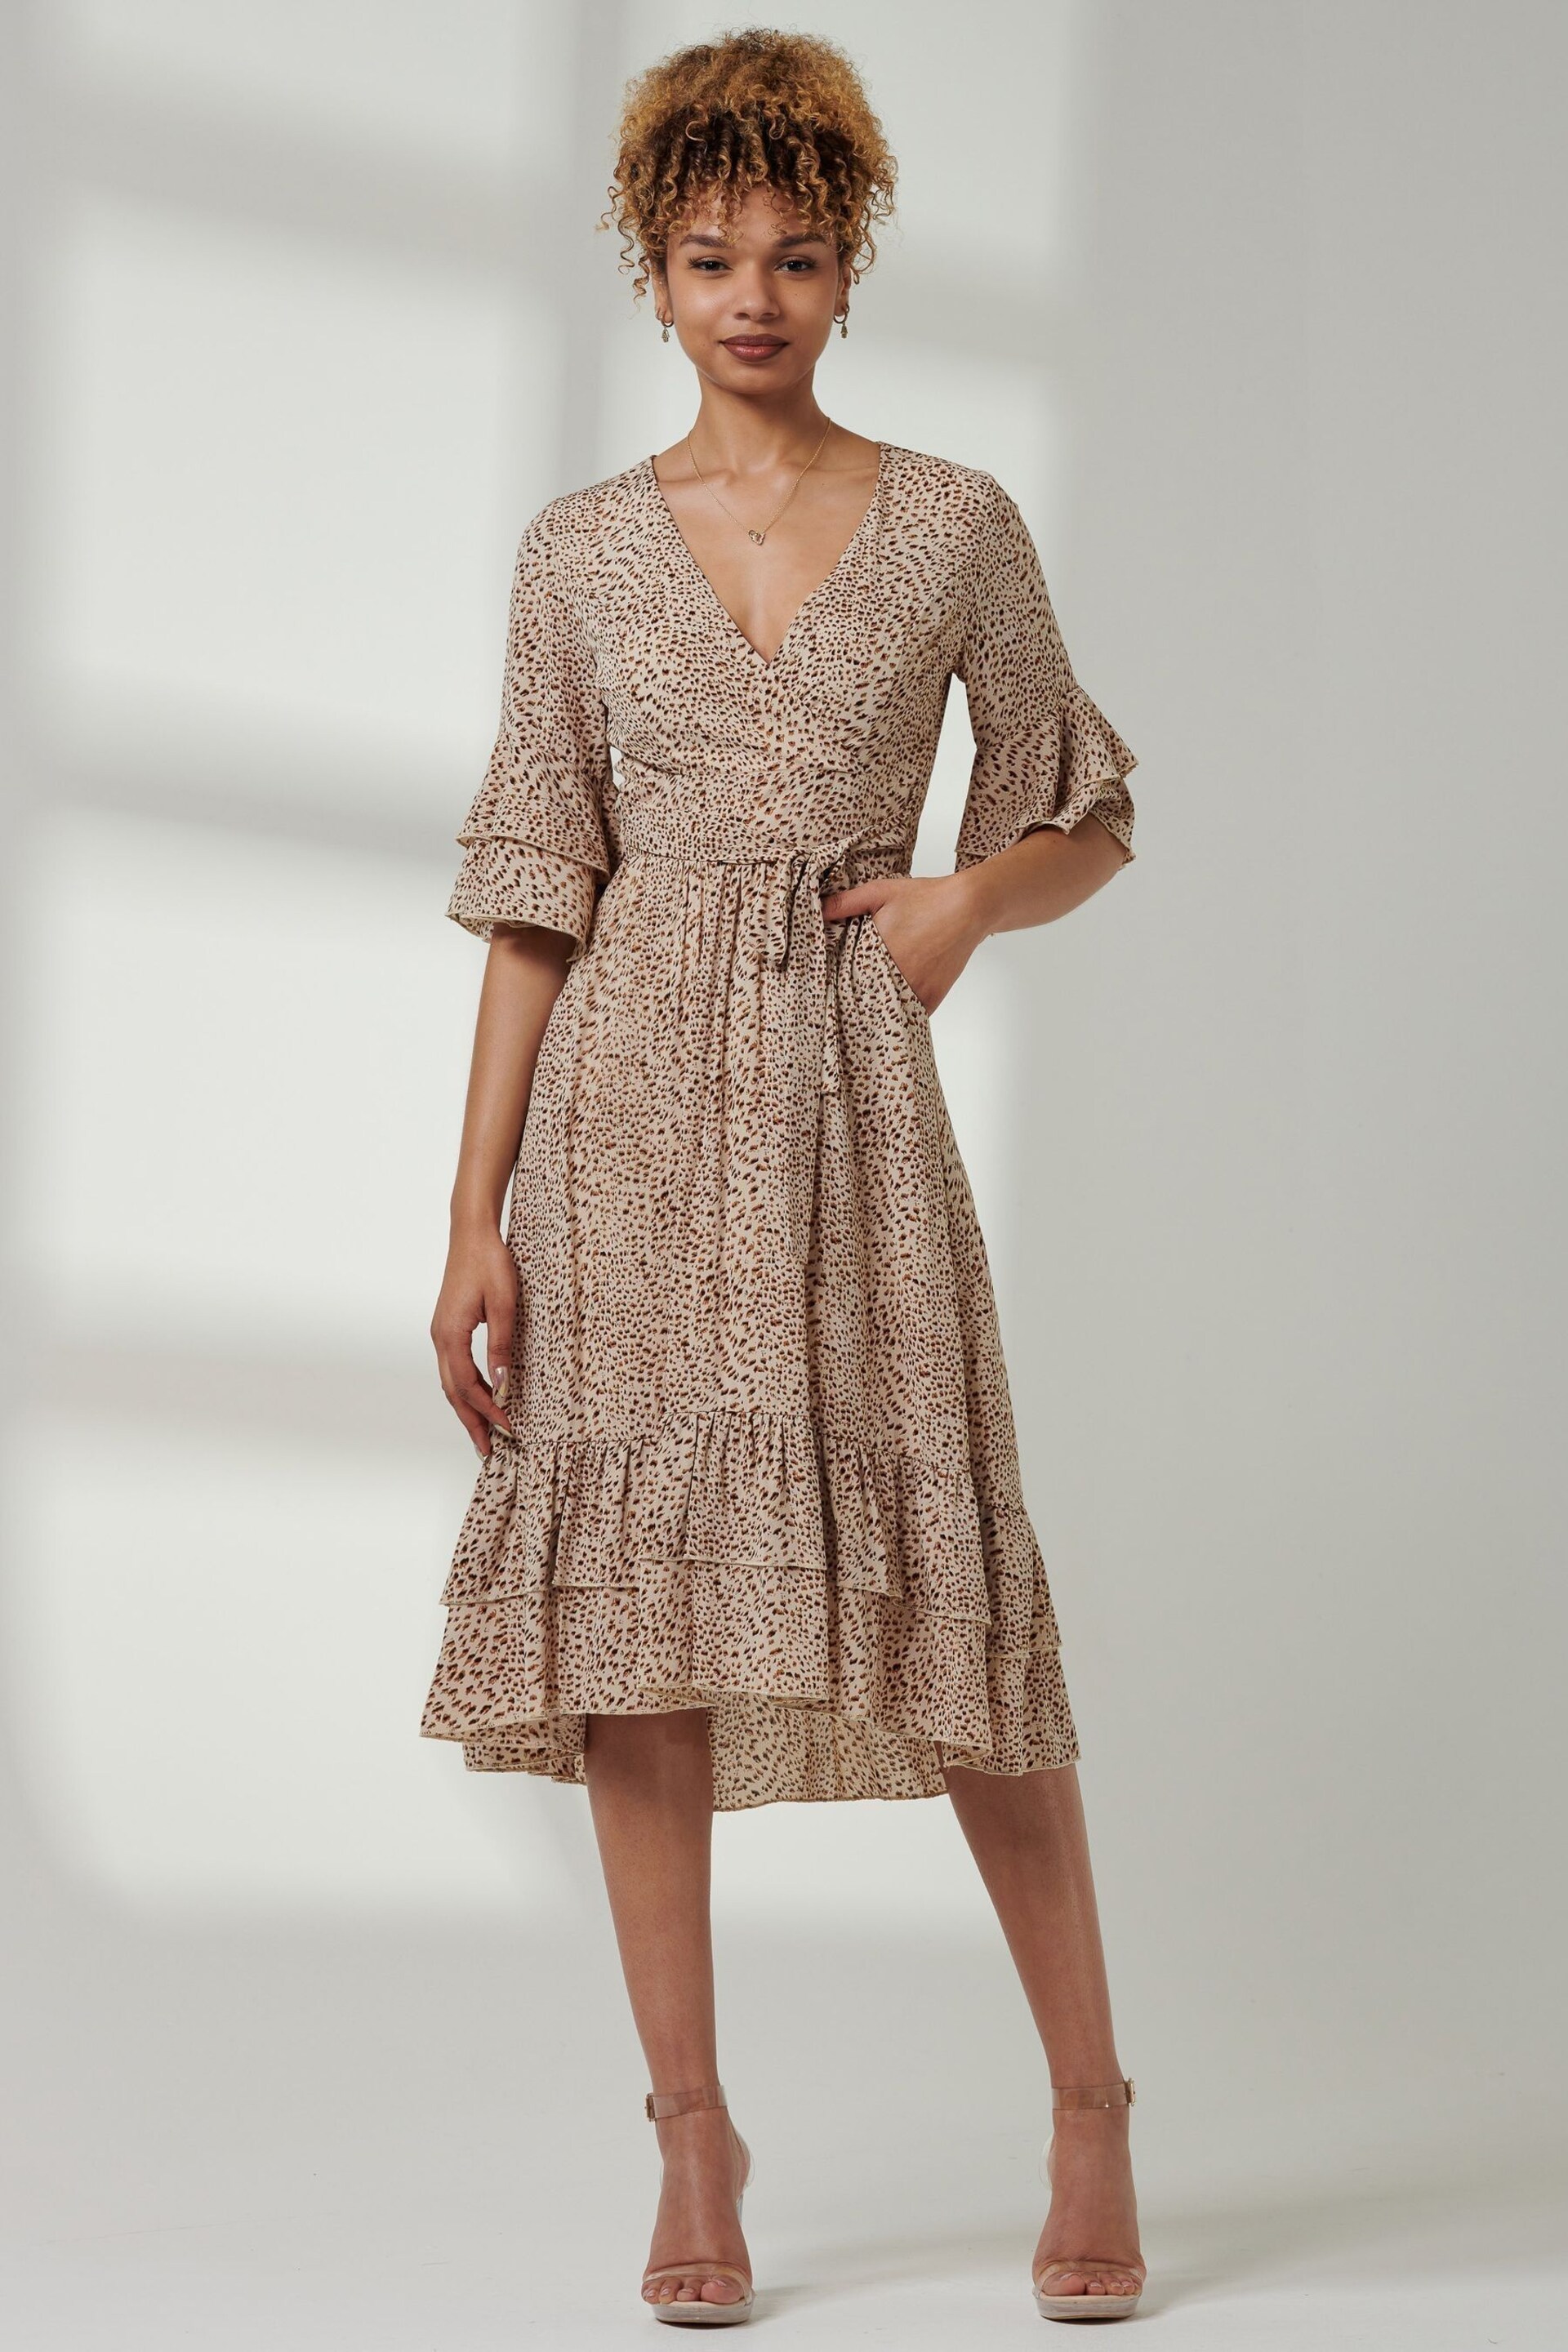 Jolie Moi Brown Tiered Detail Smock Dress - Image 1 of 6